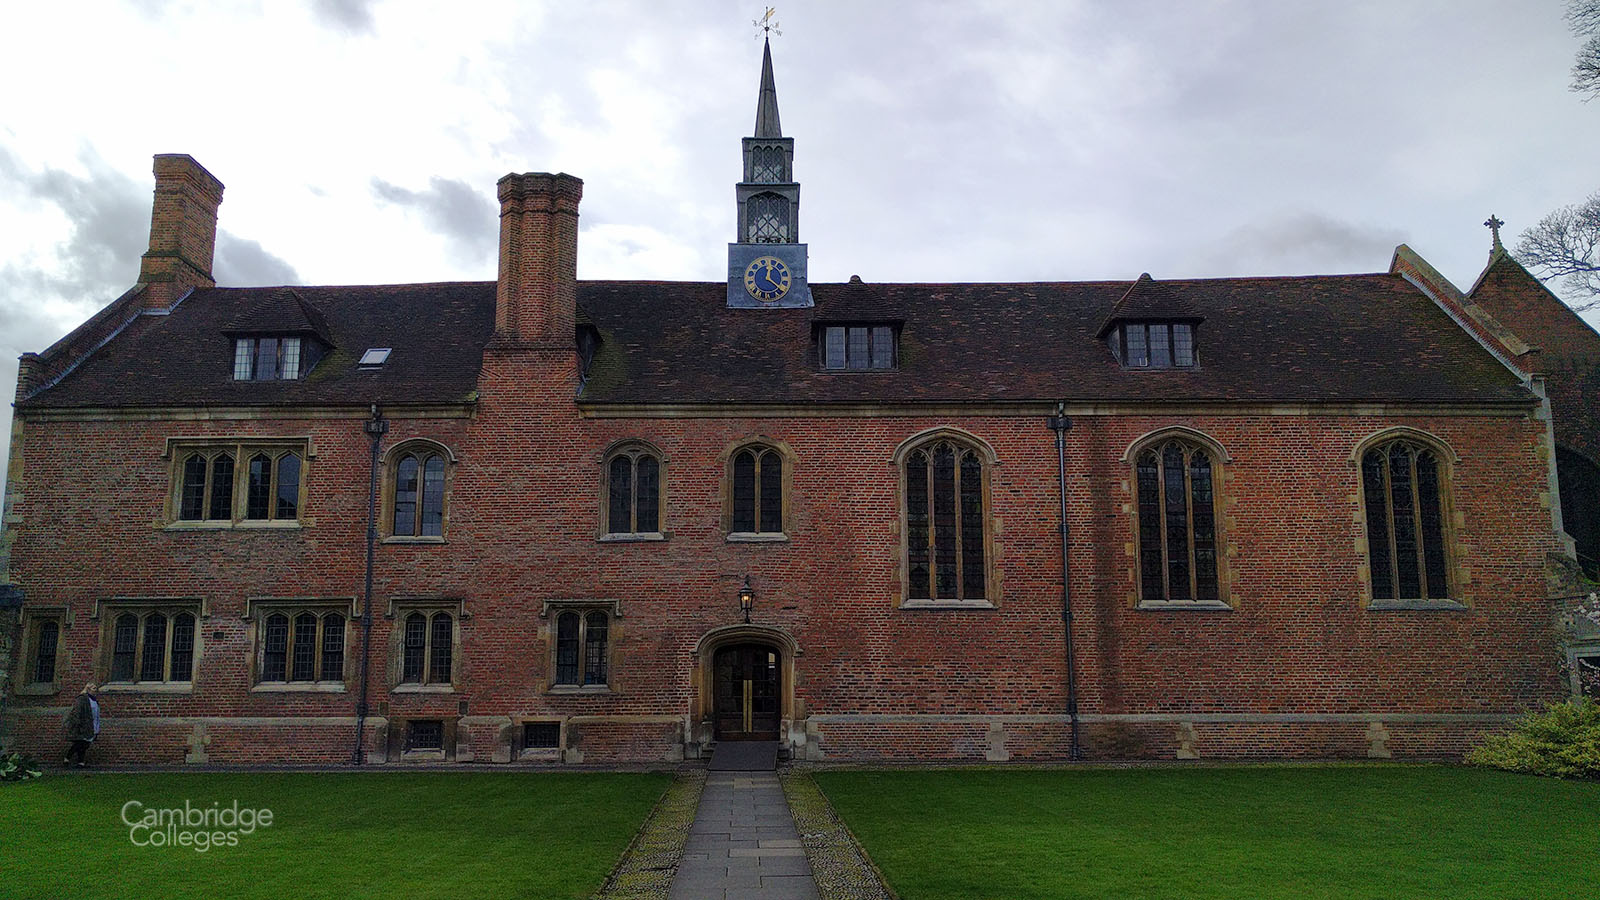 Buildings at Magdalene college, Cambridge